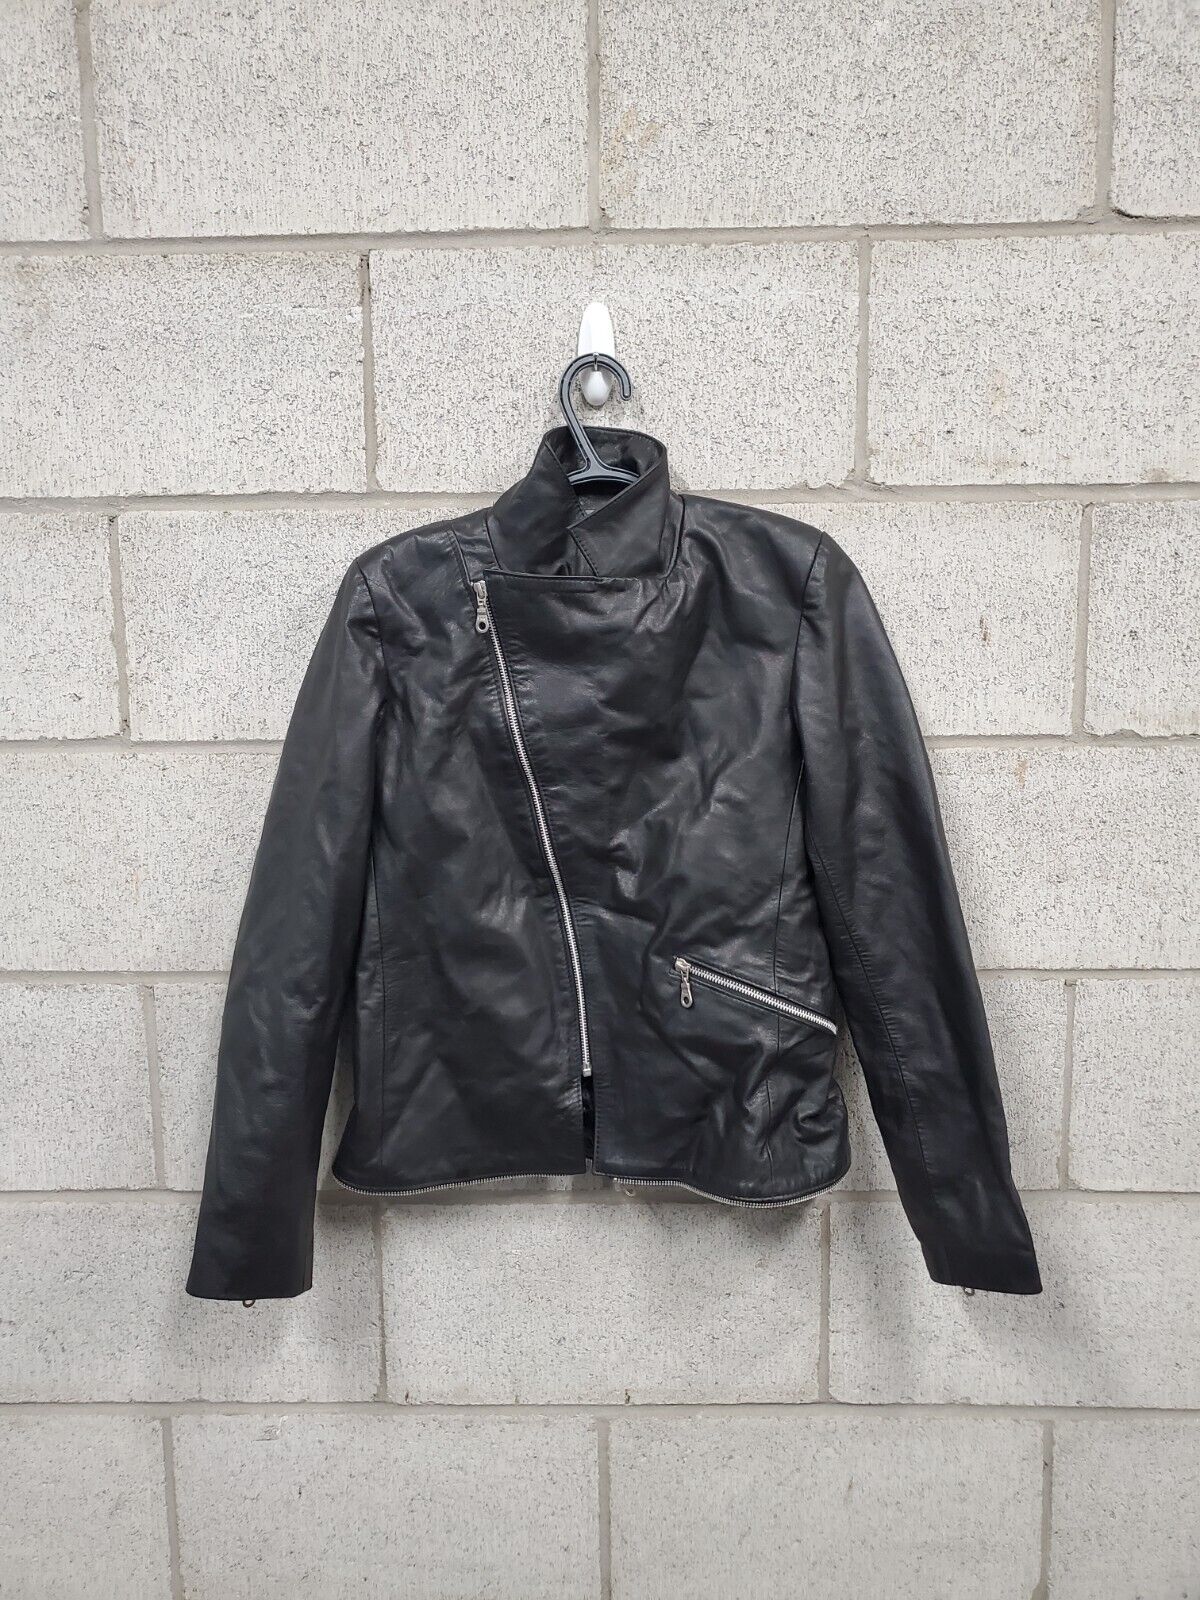 Womens Koux Leather Jacket Fits Small